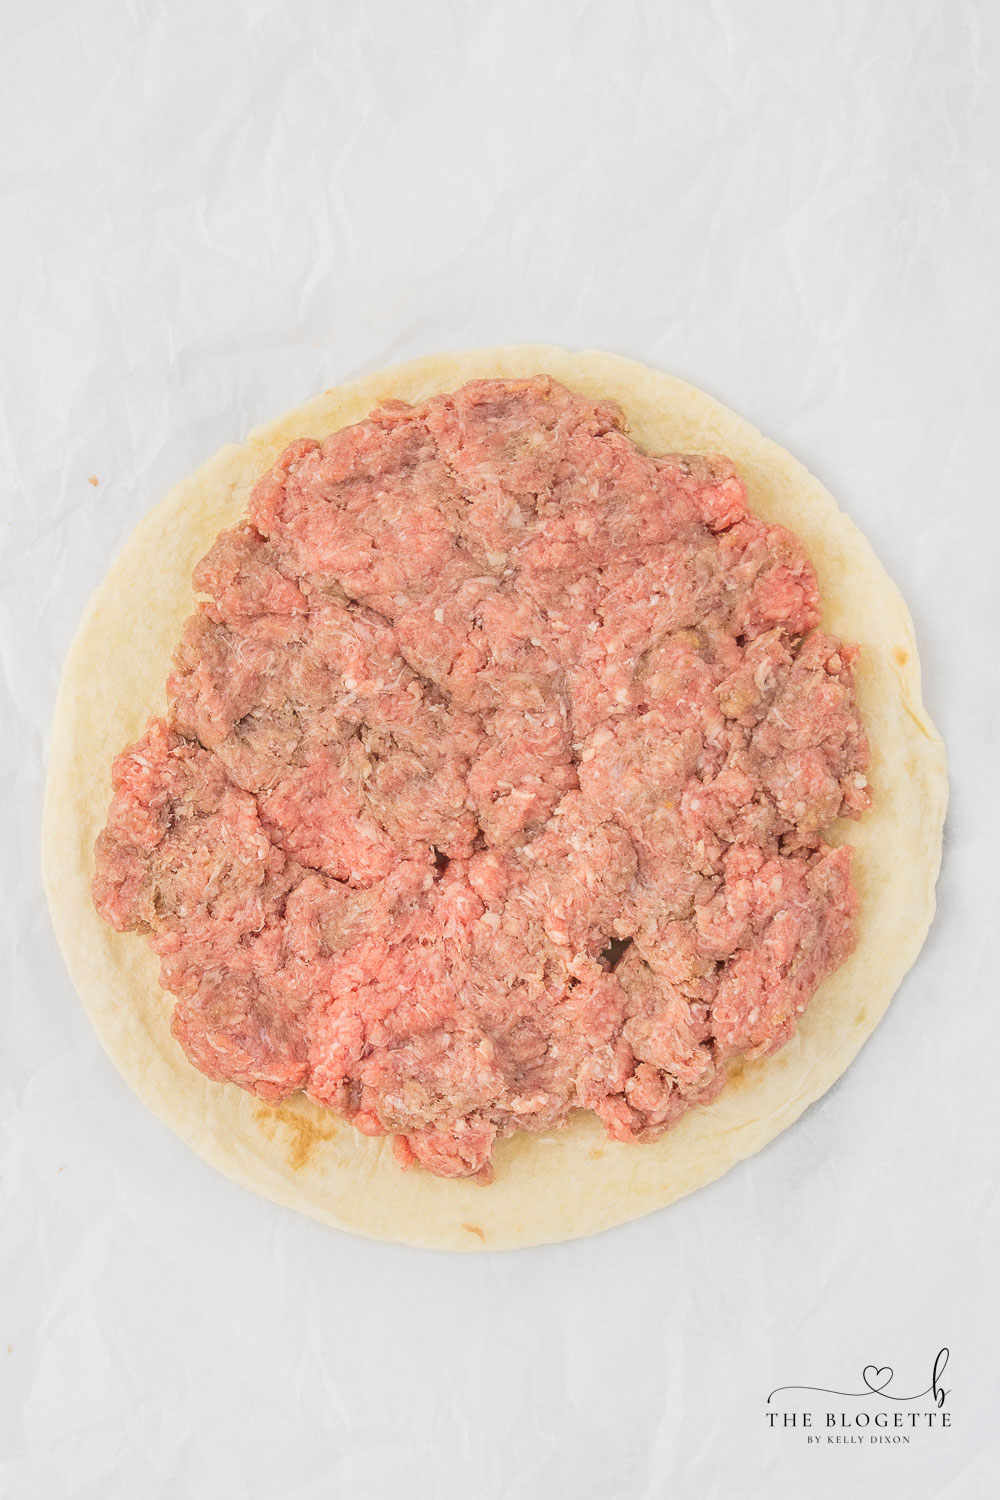 Ground beef patty with a tortilla